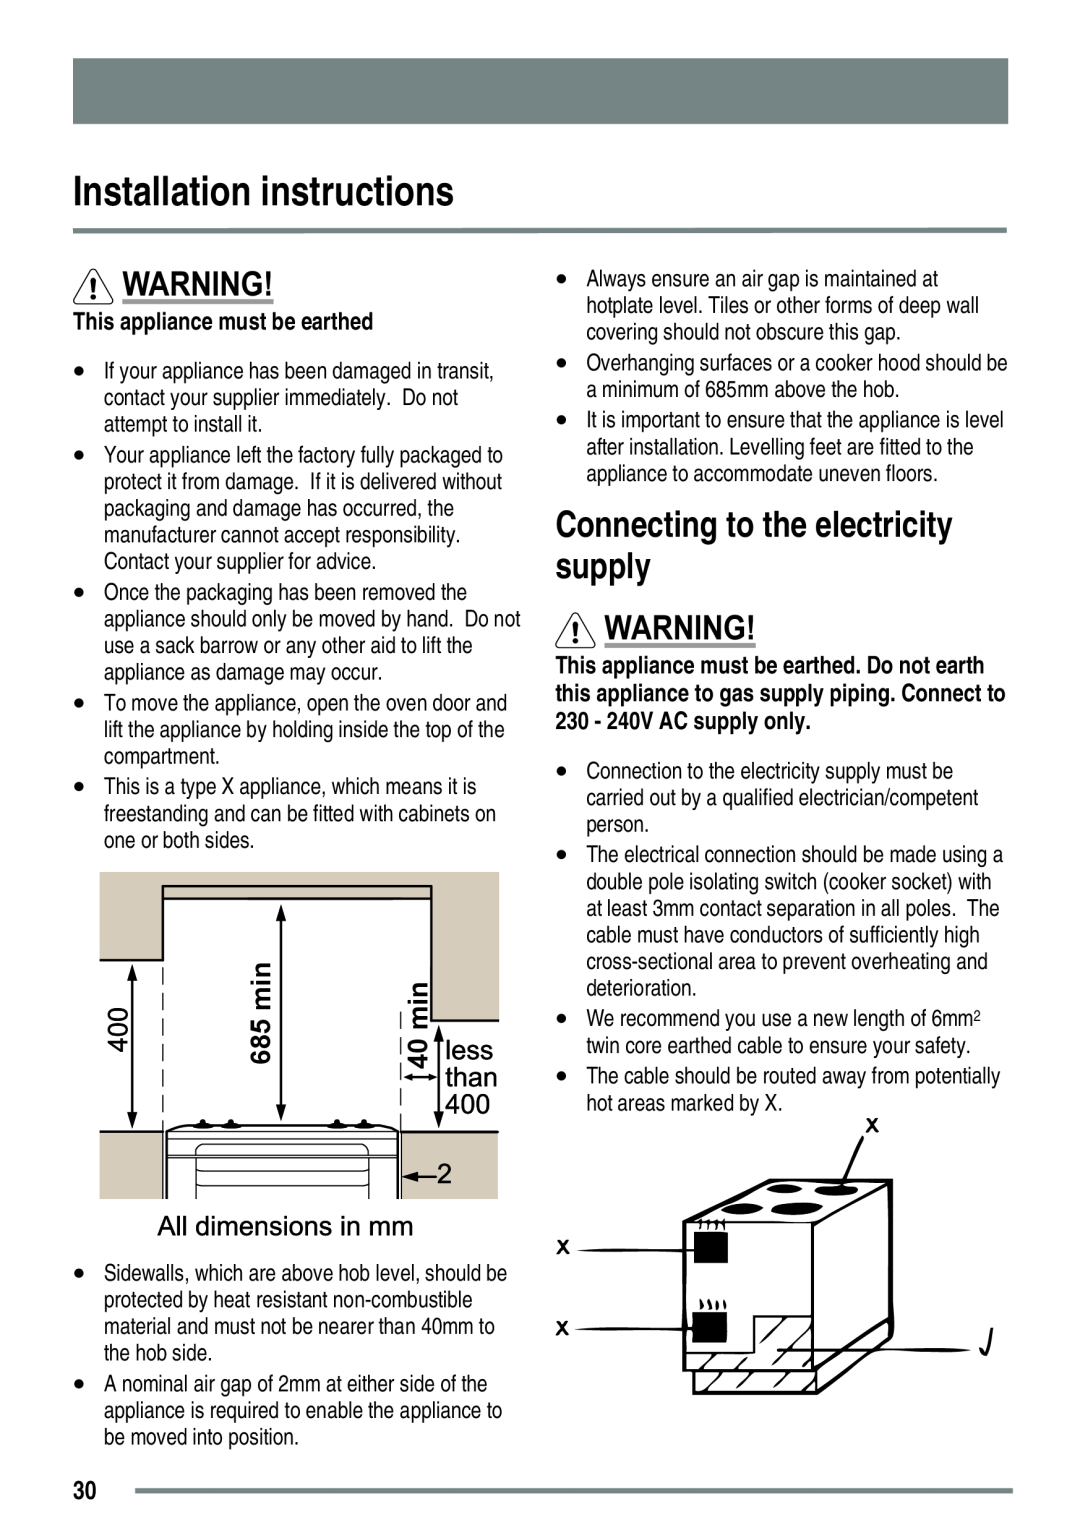 Zanussi ZKC5030 Installation instructions, Connecting to the electricity supply, This appliance must be earthed, 685 min 